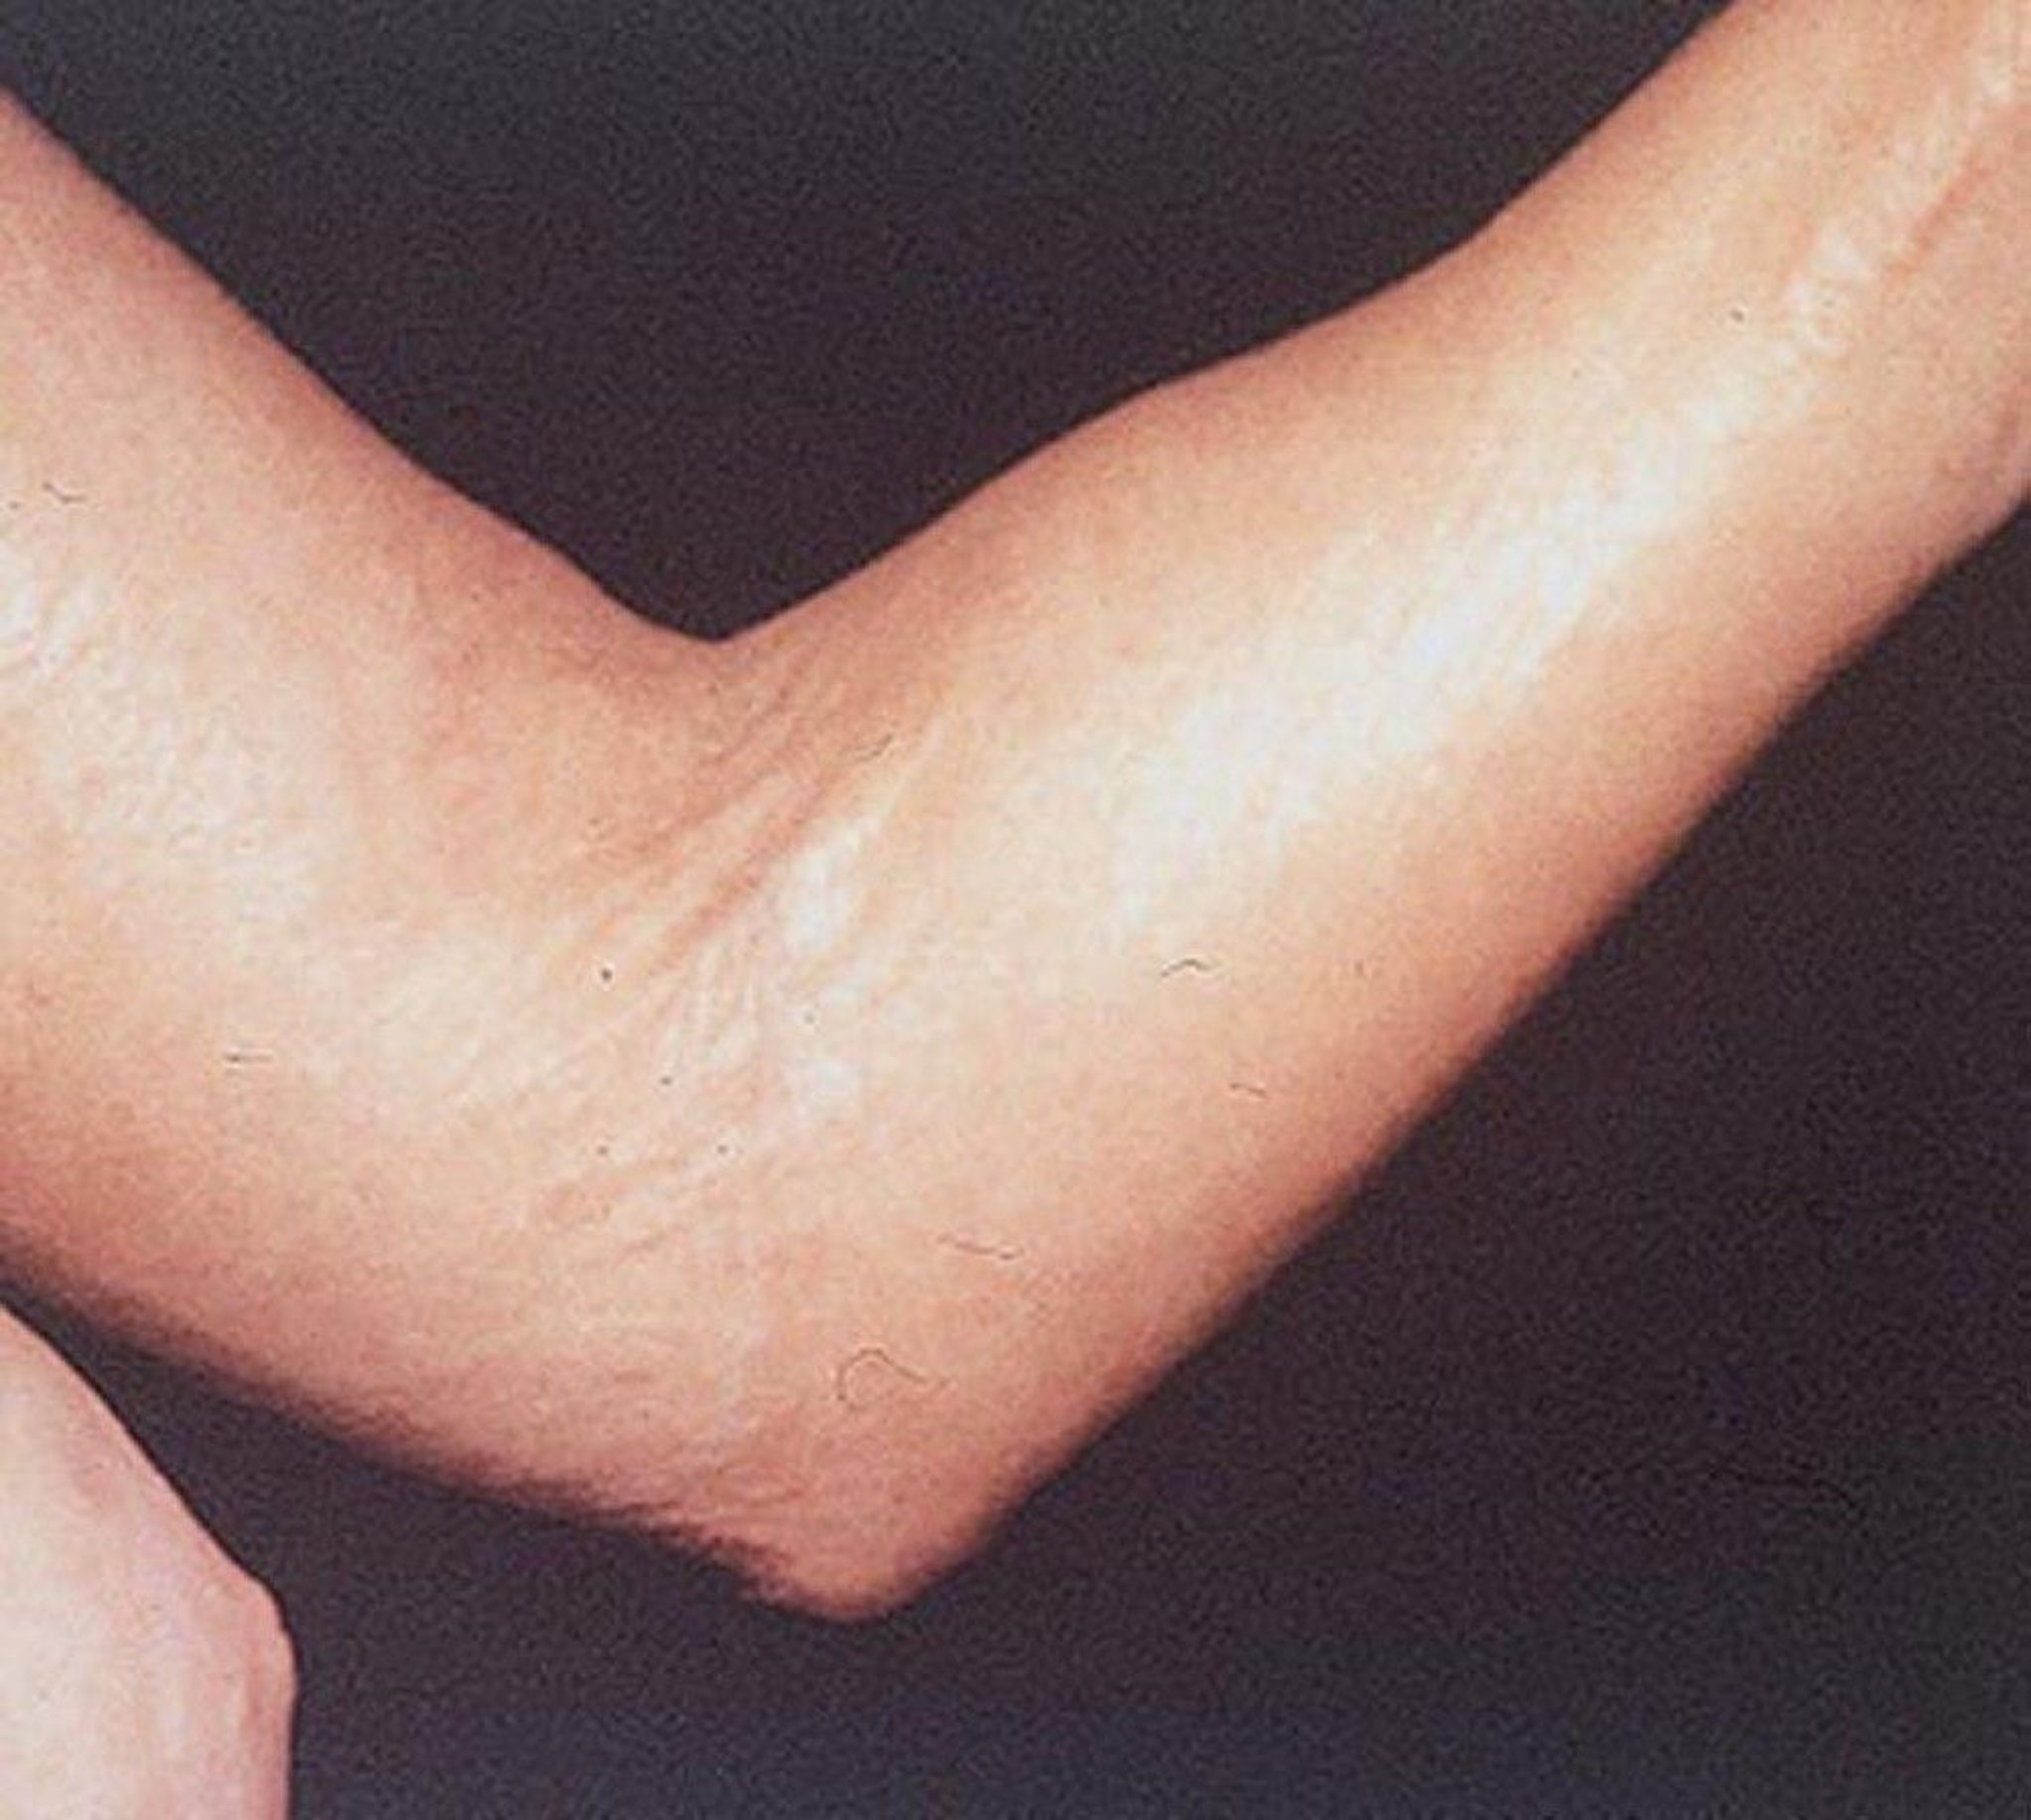 Elbow Contracture in Systemic Sclerosis